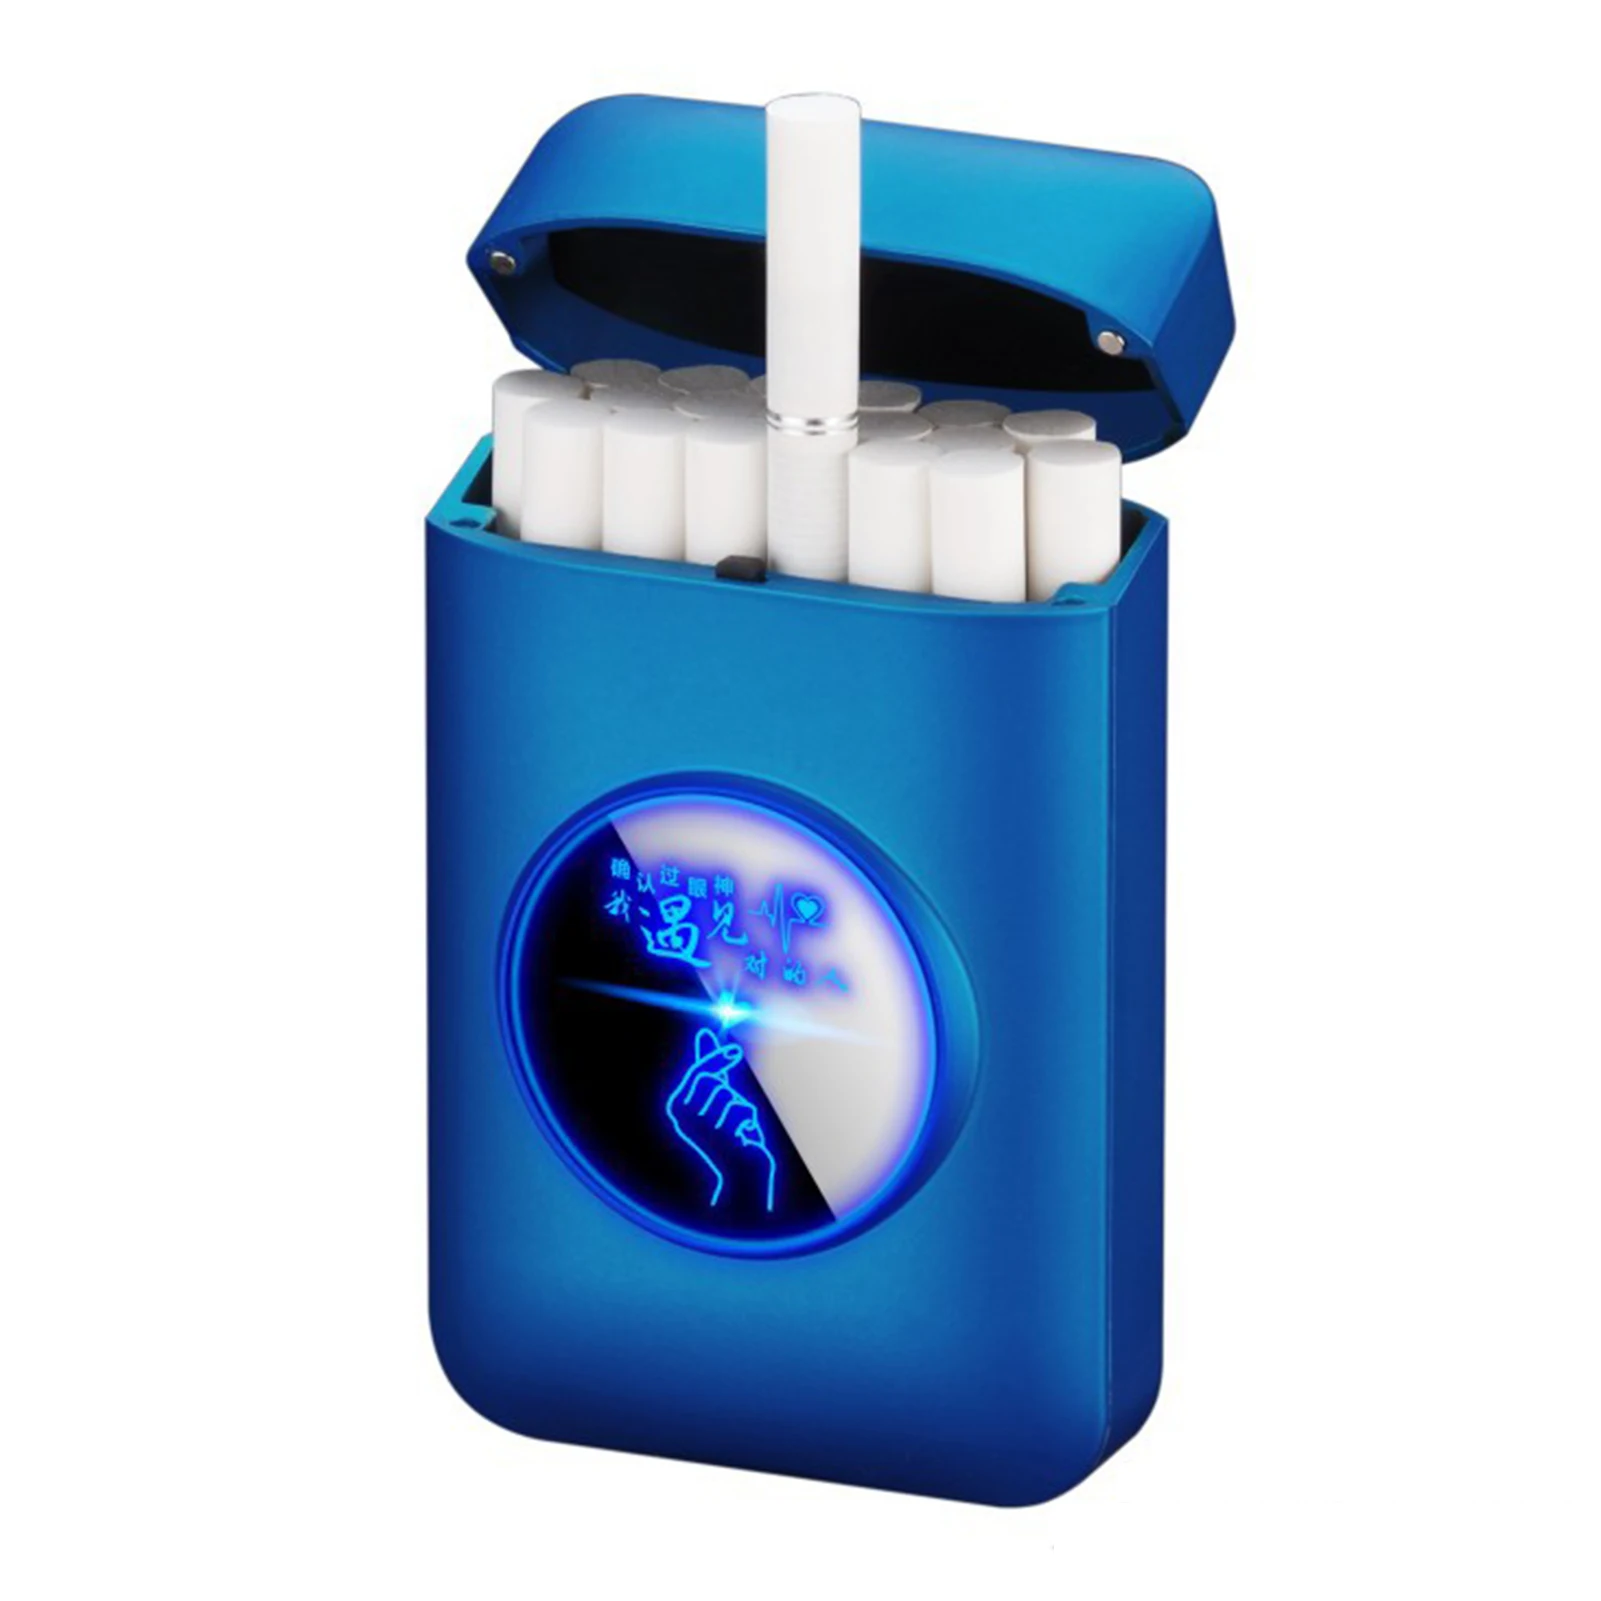 

2 In 1 Cigarette Case Inflatable Gas USB Lighter Hold 20pcs Cigarettes Storage Pocket Box Windproof Rechargeable Coil Lighter